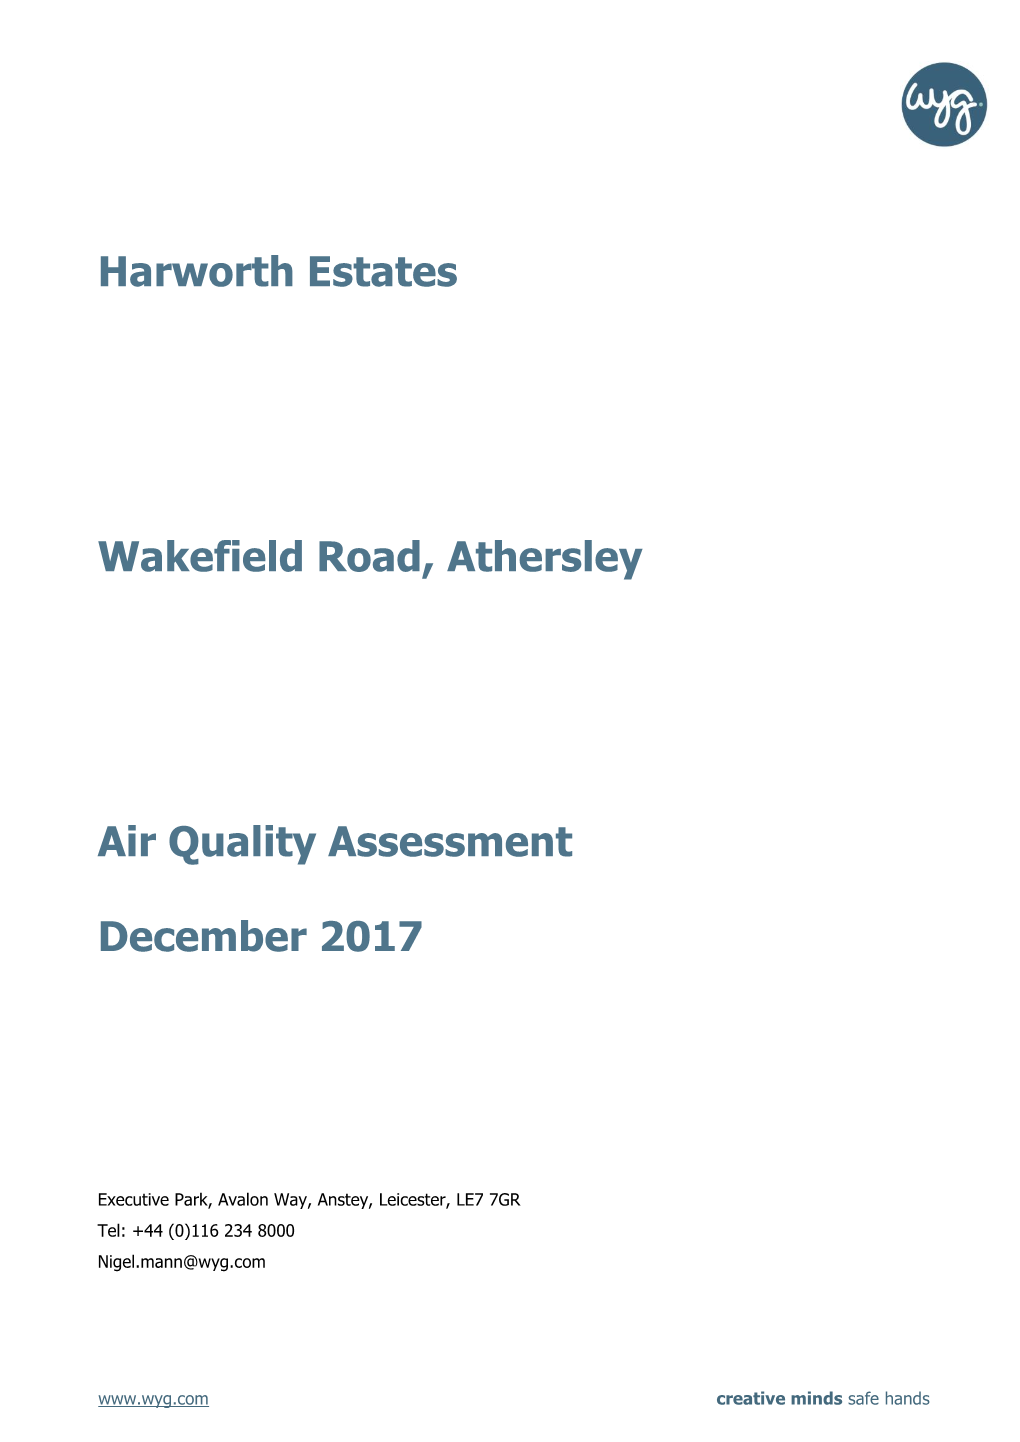 Harworth Estates Wakefield Road, Athersley Air Quality Assessment